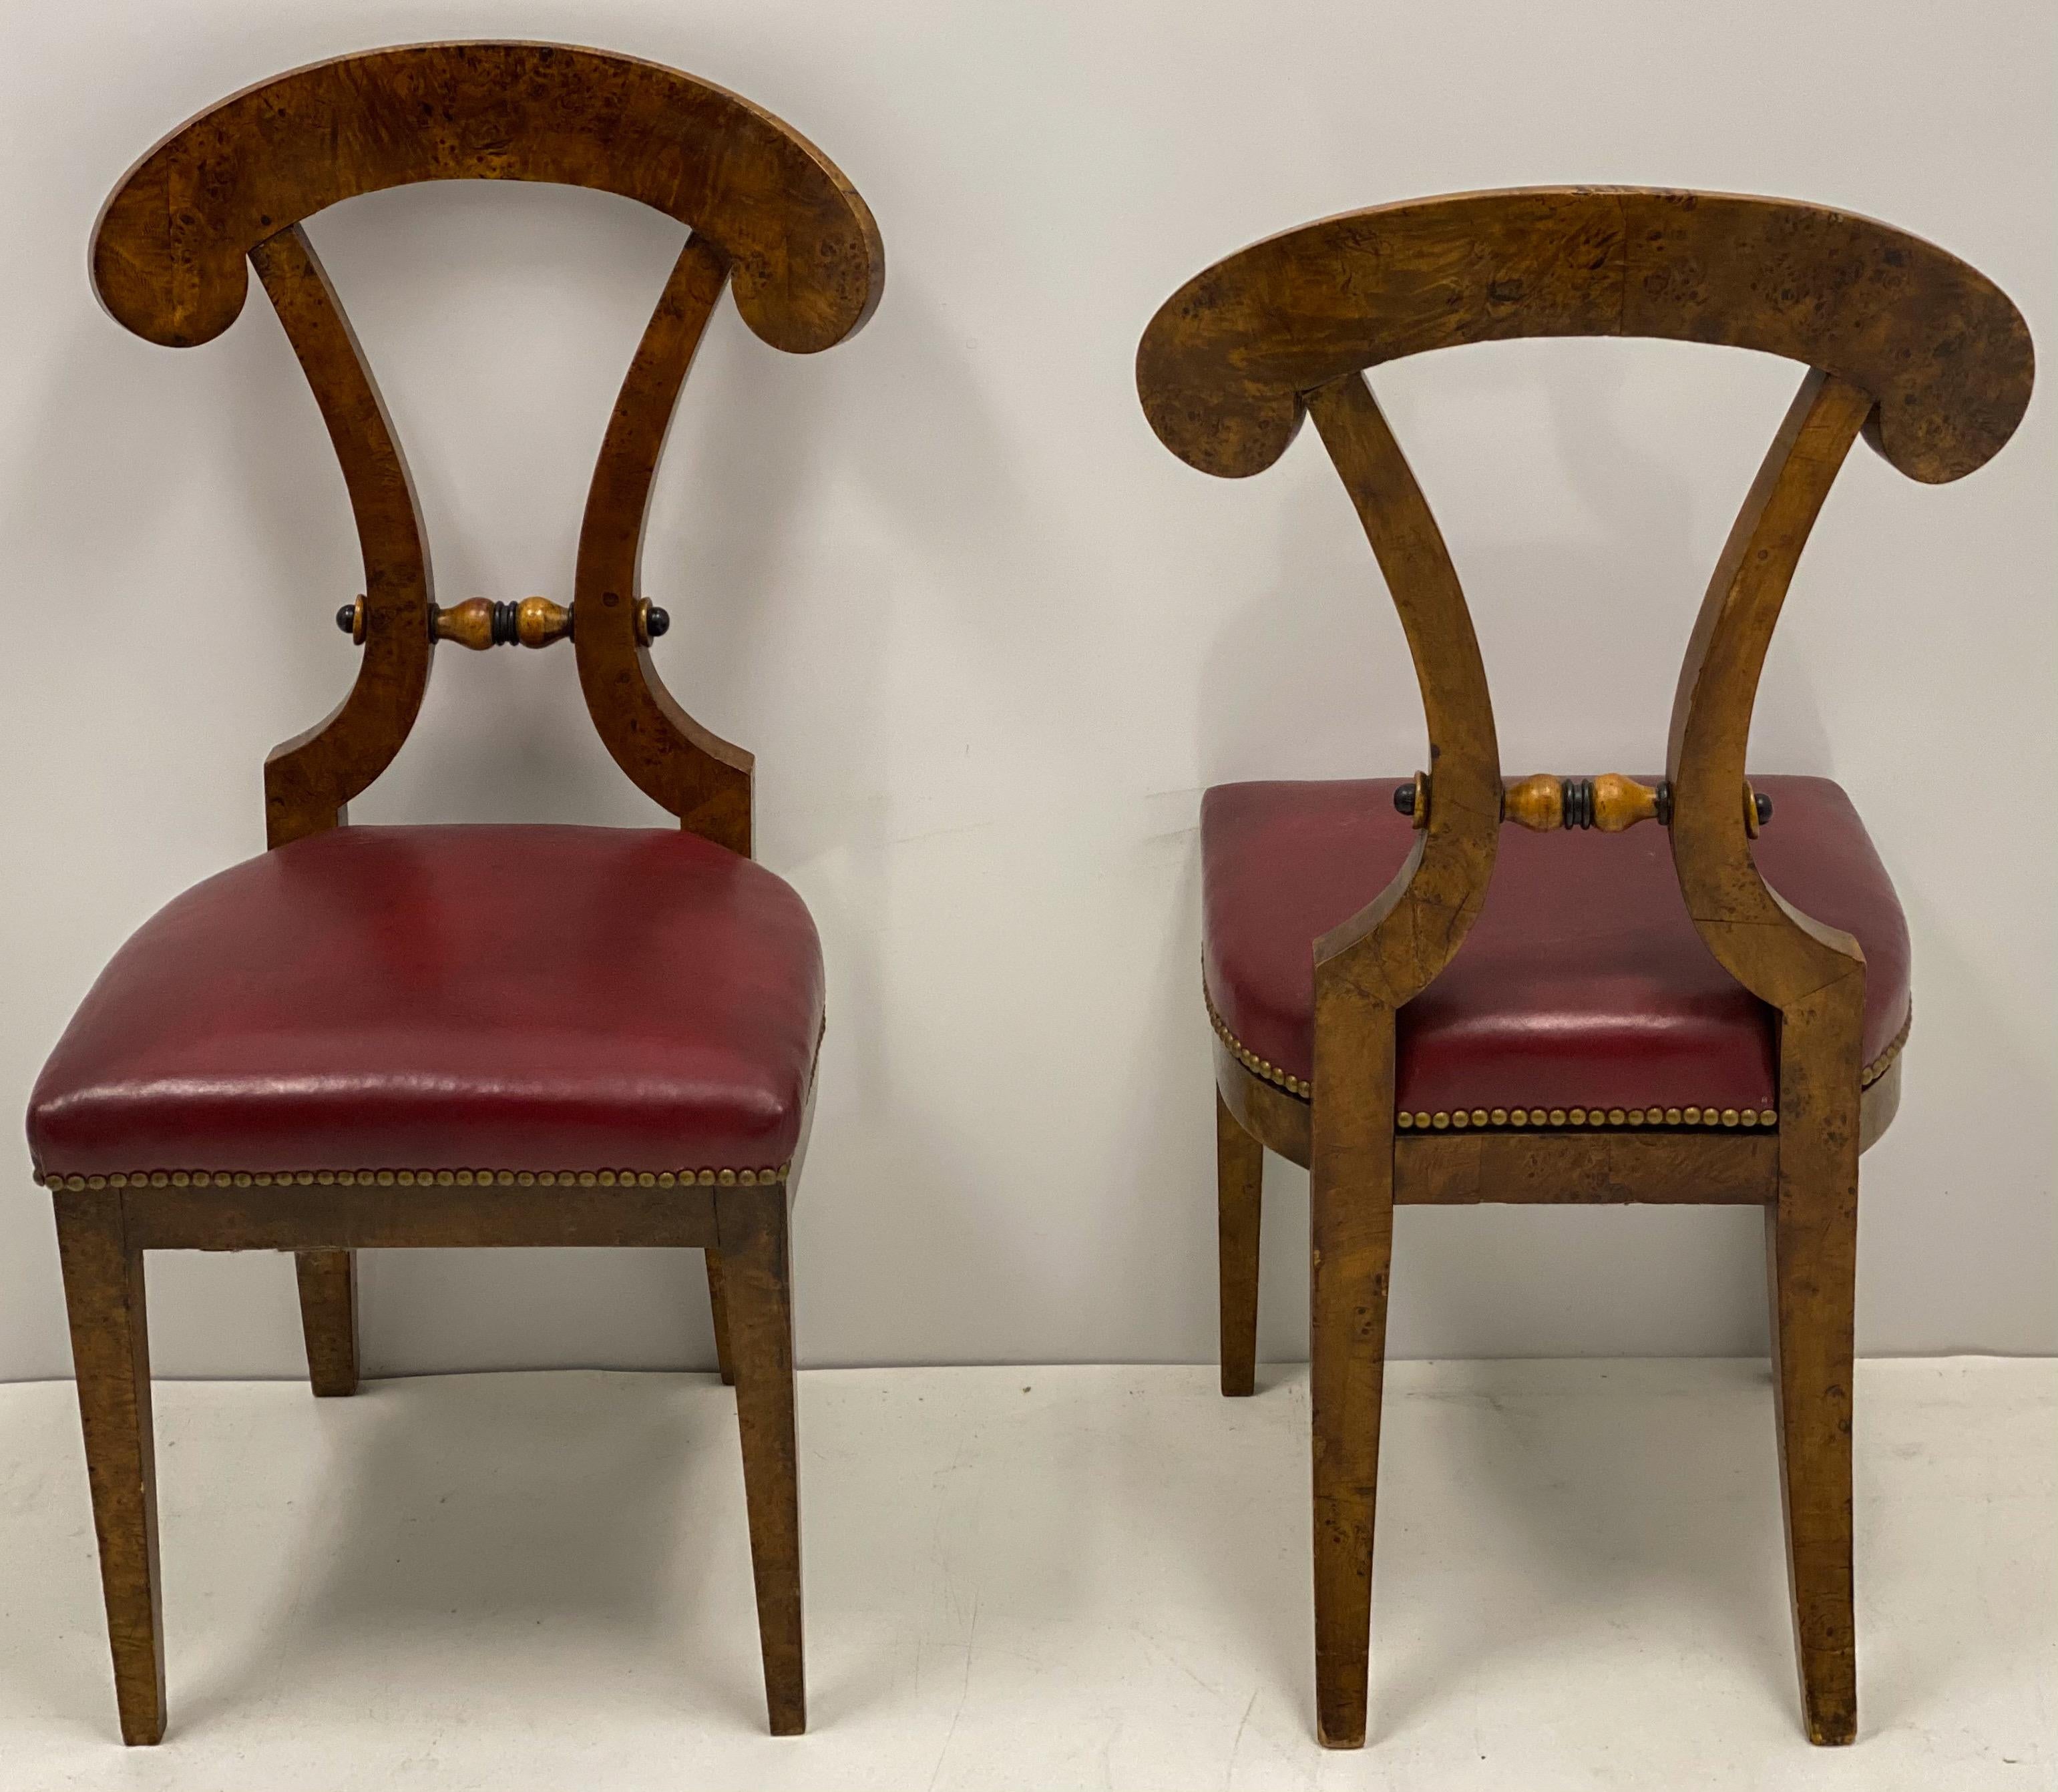 Art Deco Biedermeier Burlwood and Leather Chairs, Set of 4 For Sale 1